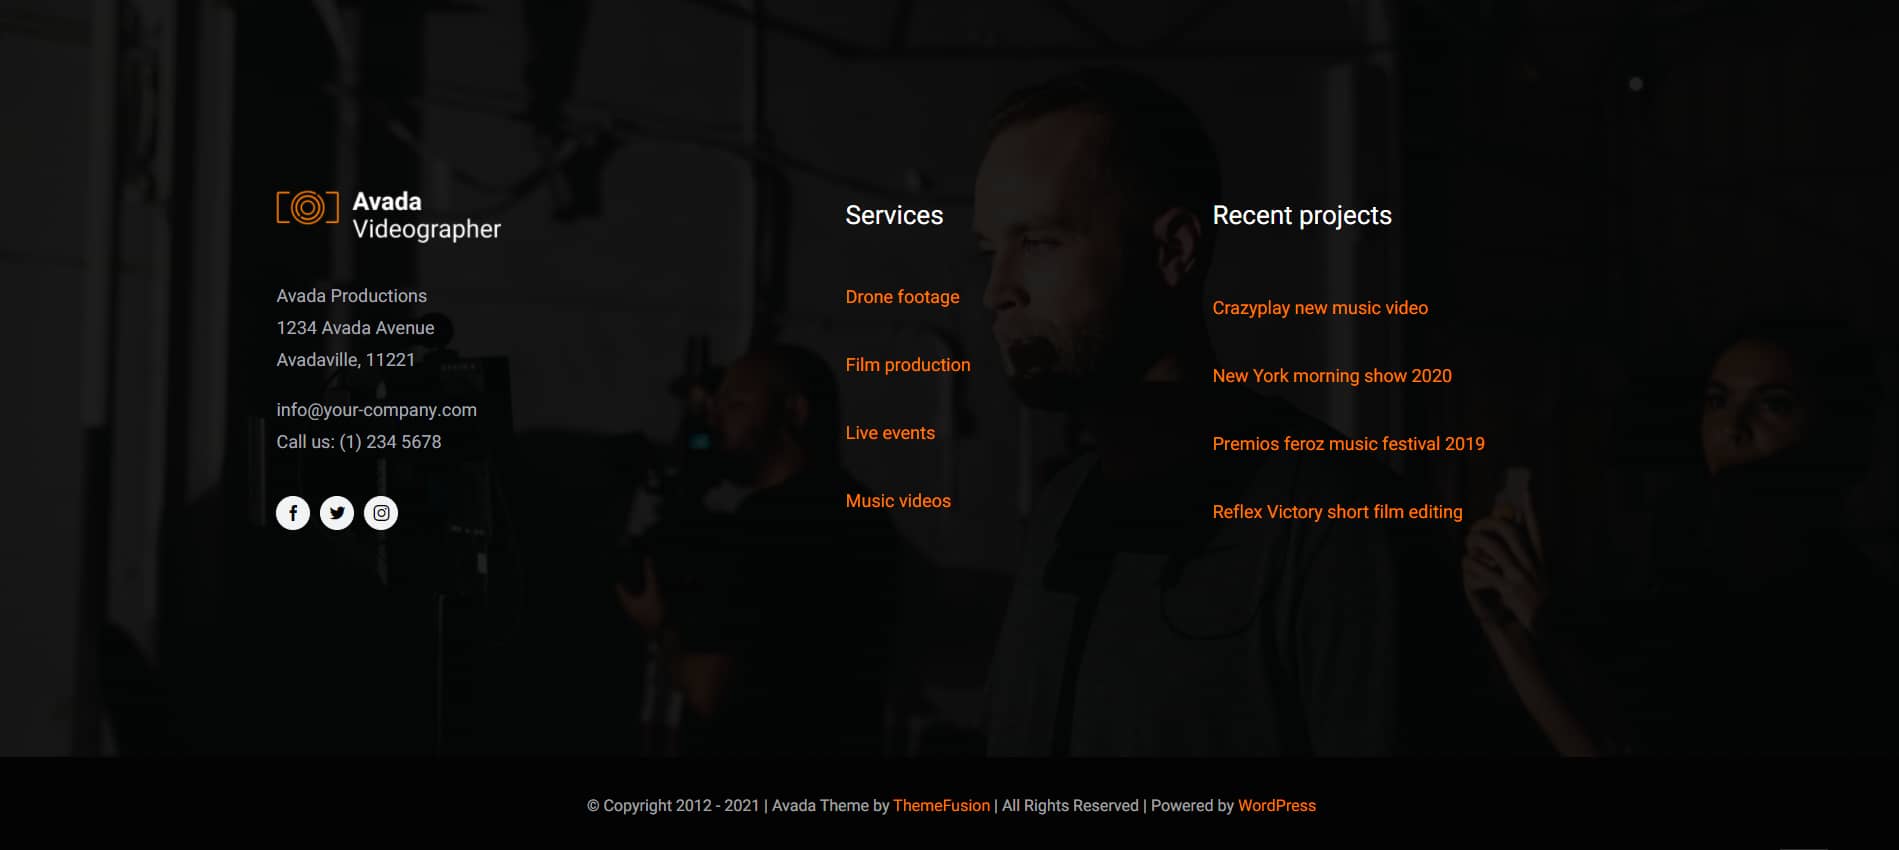 Avada Videographer Footer